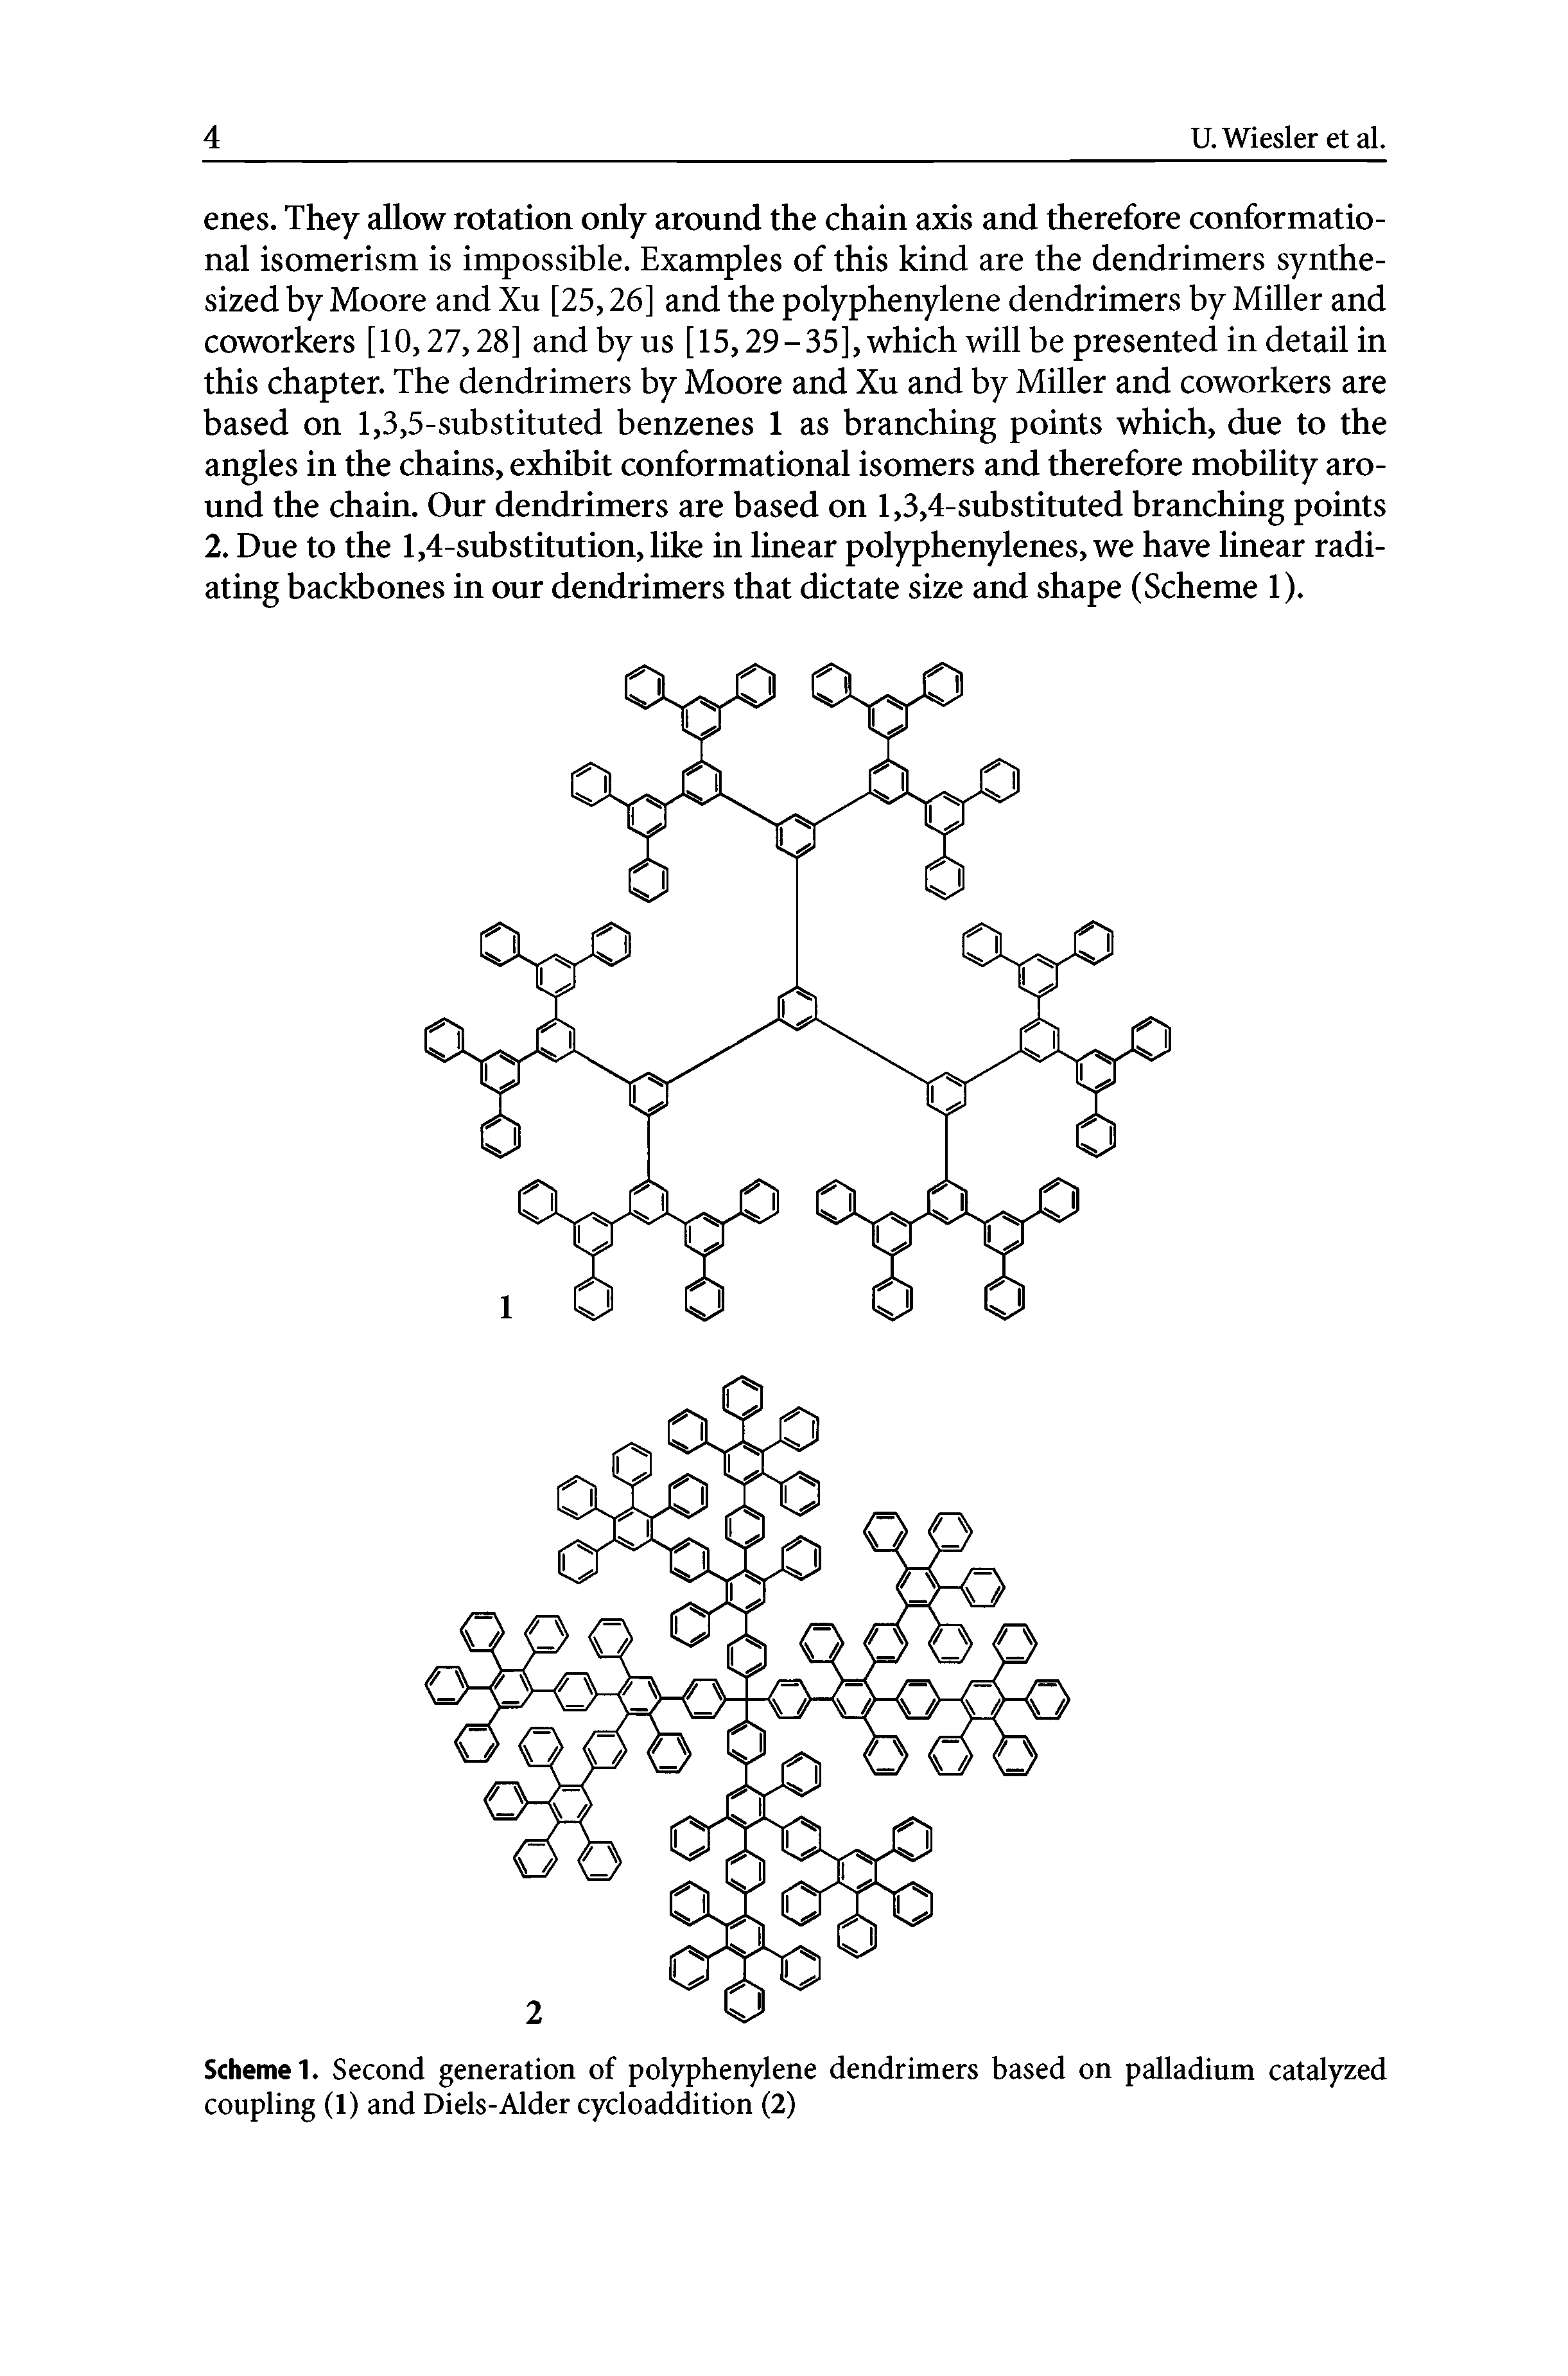 Scheme 1. Second generation of polyphenylene dendrimers based on palladium catalyzed coupling (1) and Diels-Alder cycloaddition (2)...